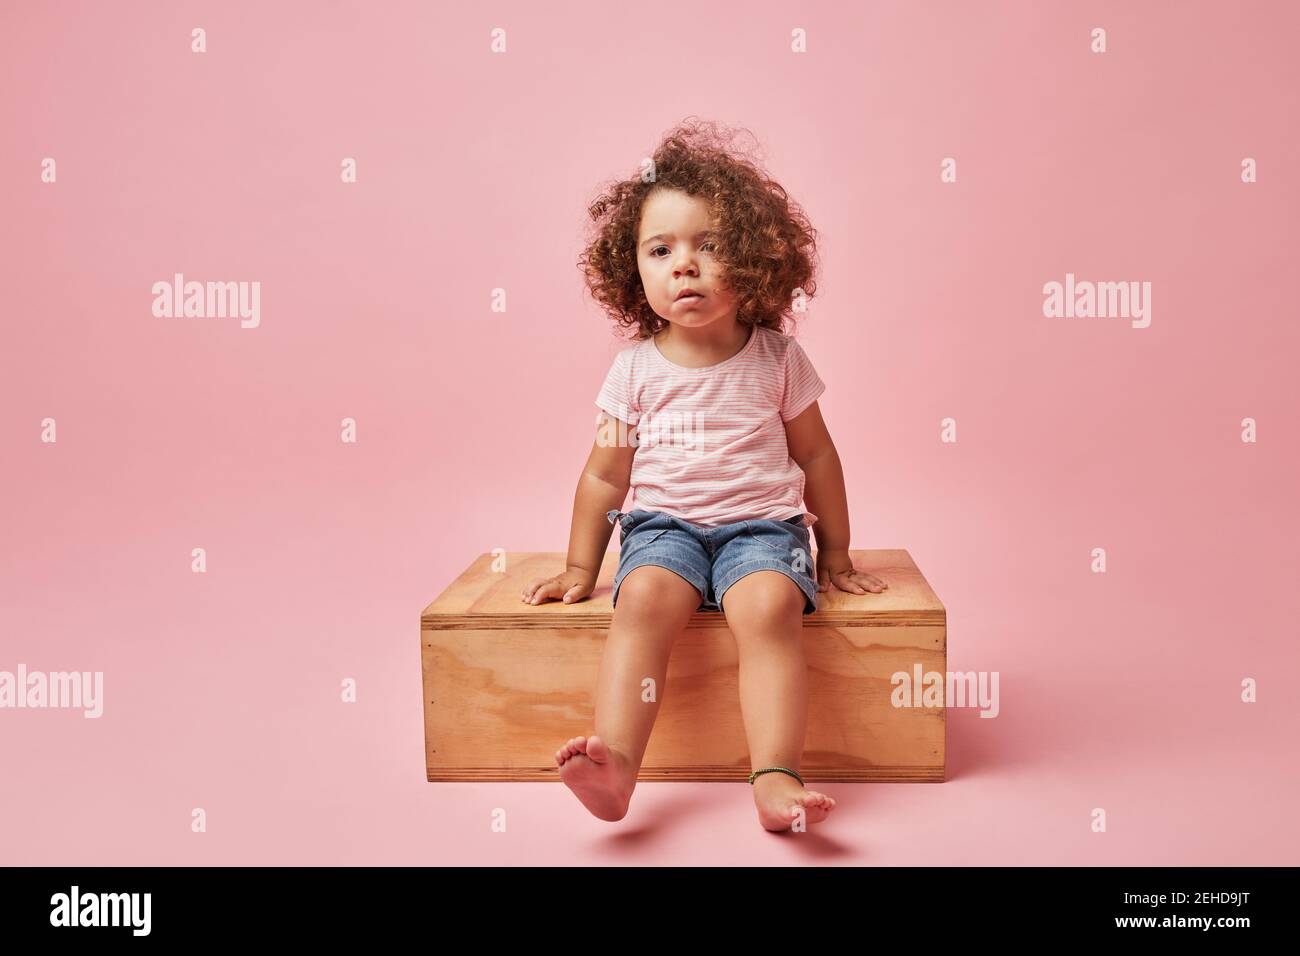 Charming barefoot child in t shirt and denim shorts with curly hair looking away while sitting on wooden platform Stock Photo